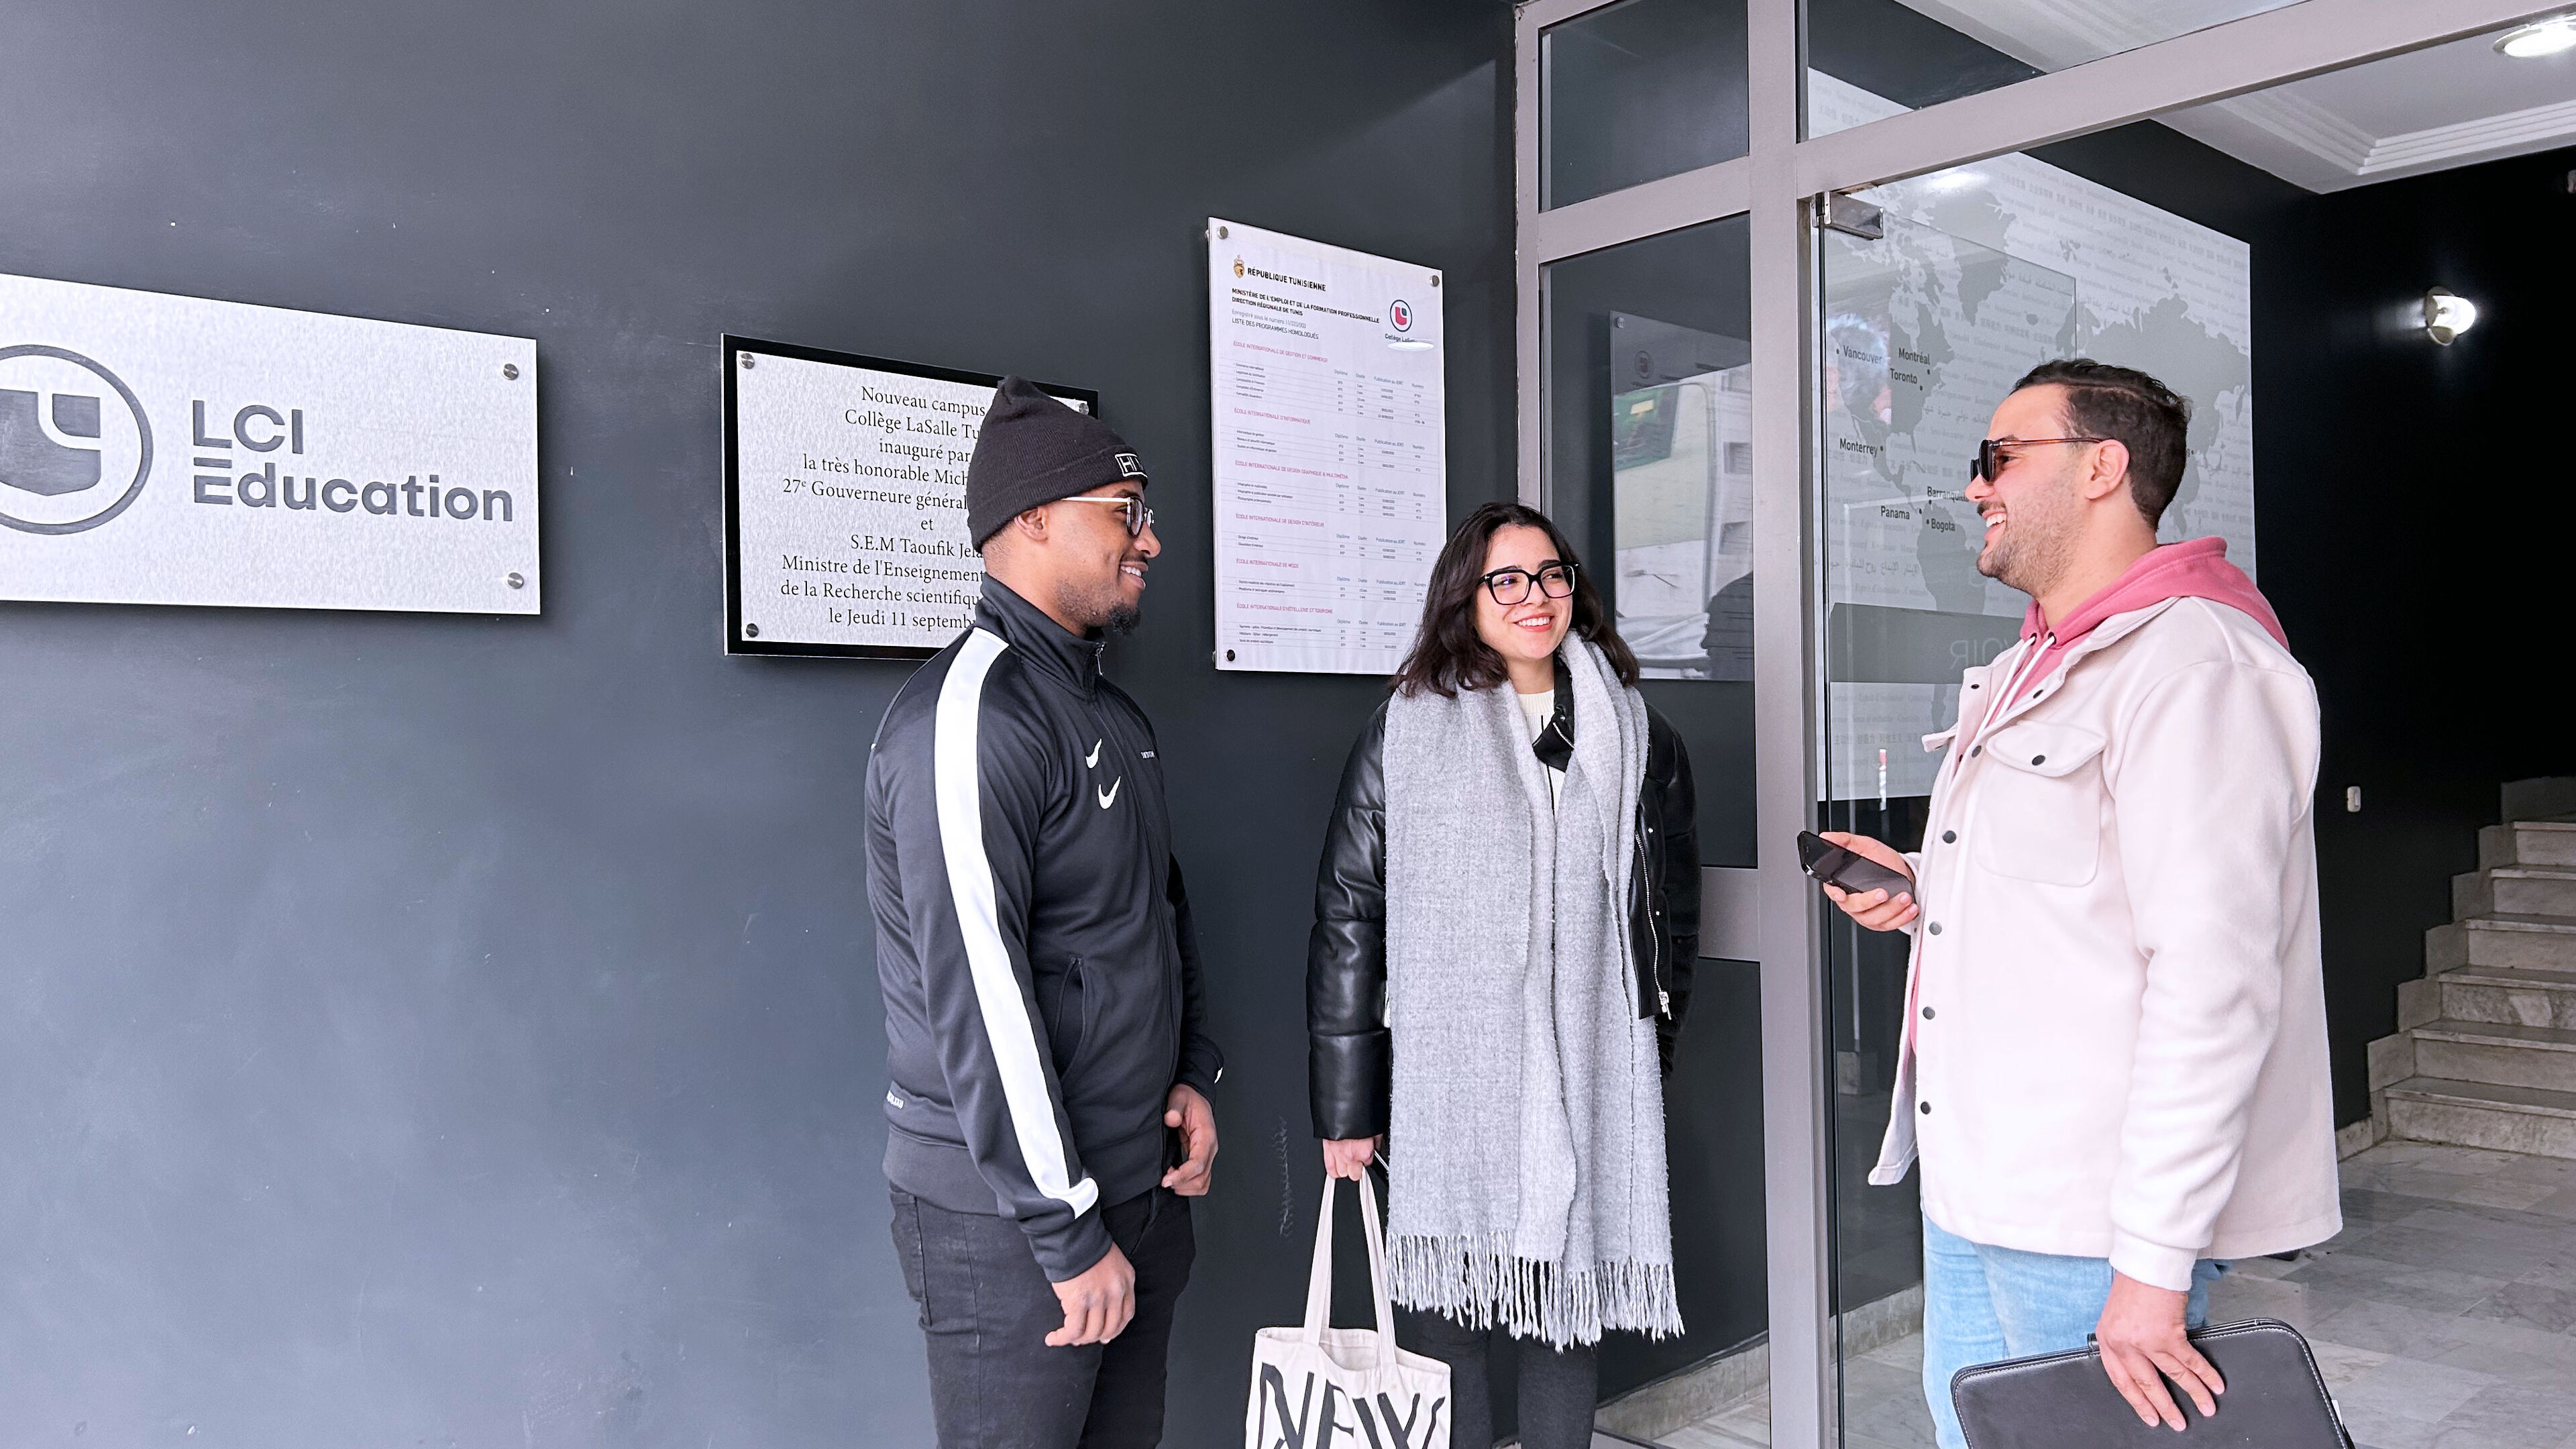  Three individuals engaging in a friendly conversation outside the LCI Education building, suggesting a collegial and welcoming educational environment.